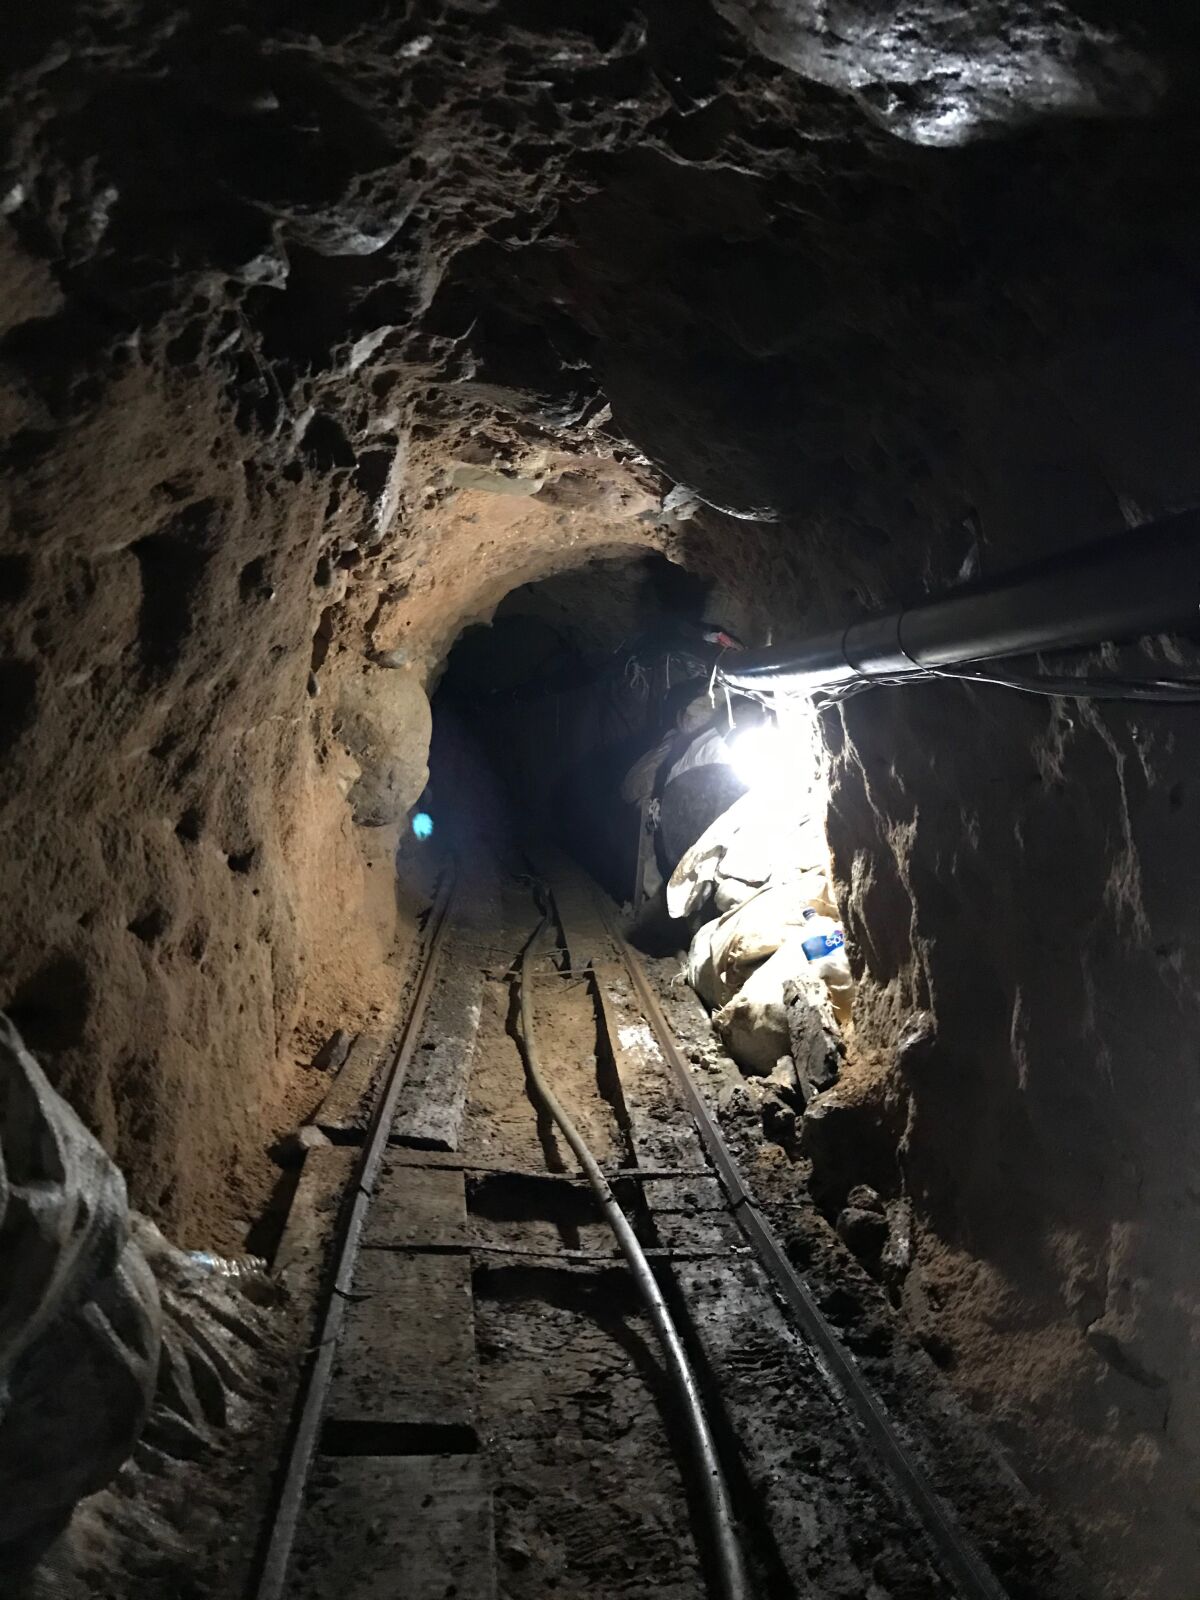 A cross-border tunnel that starts in Tijuana and ends in a San Diego warehouse was discovered March 19.